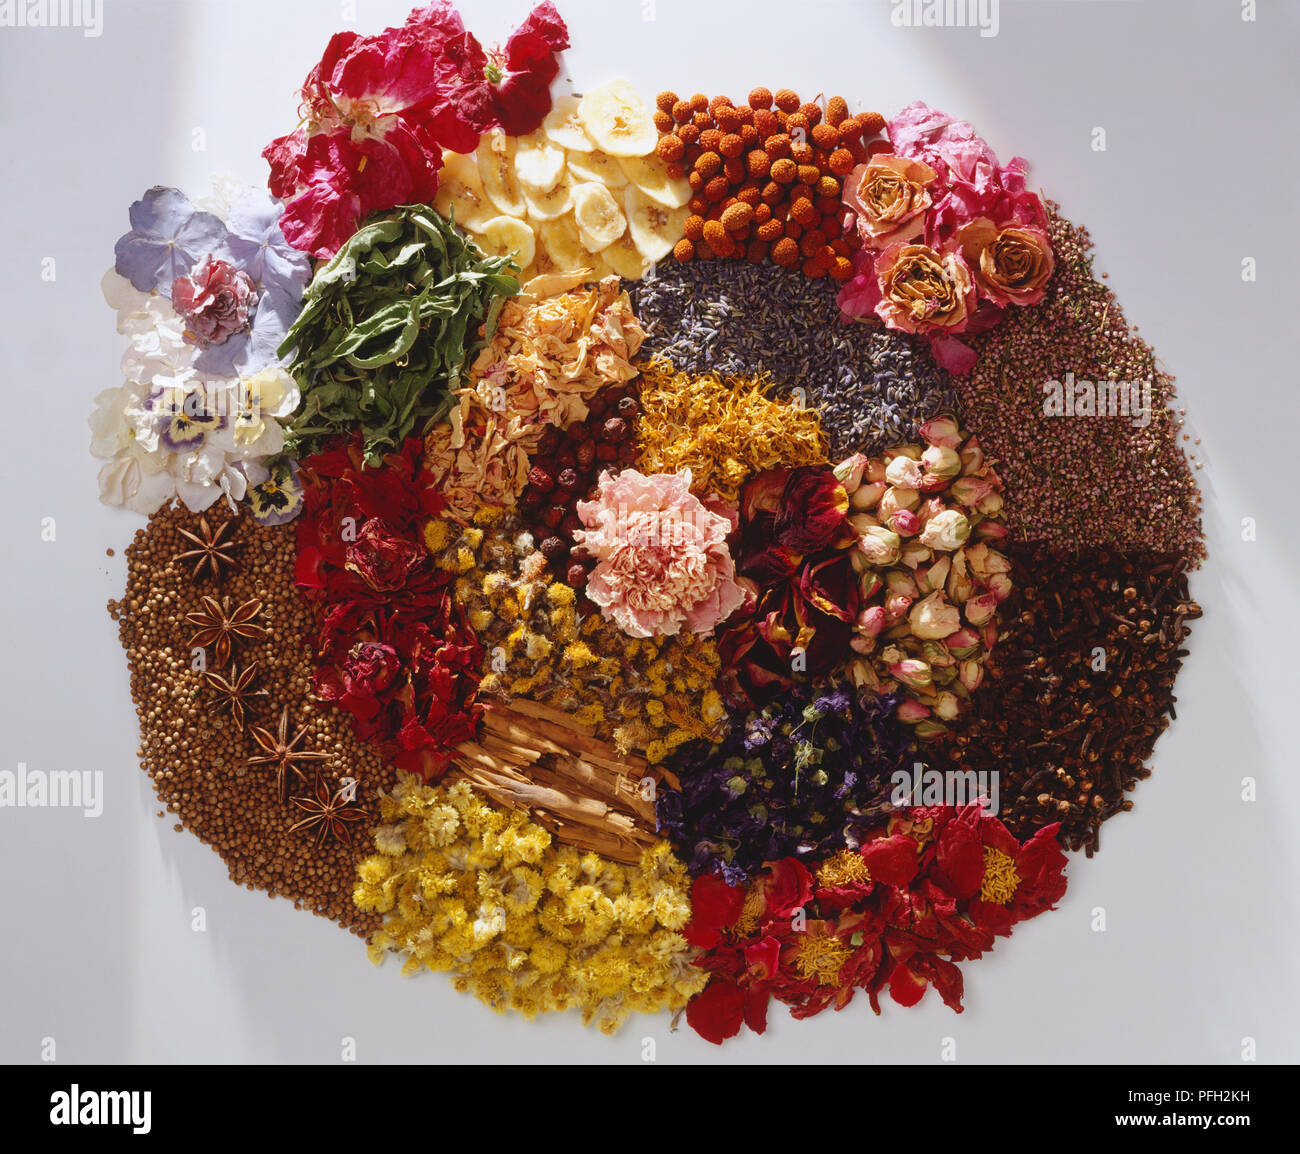 Above view of a variety of dried flowers, petals, herbs and spices including roses, cinnamon, lavender. Stock Photo